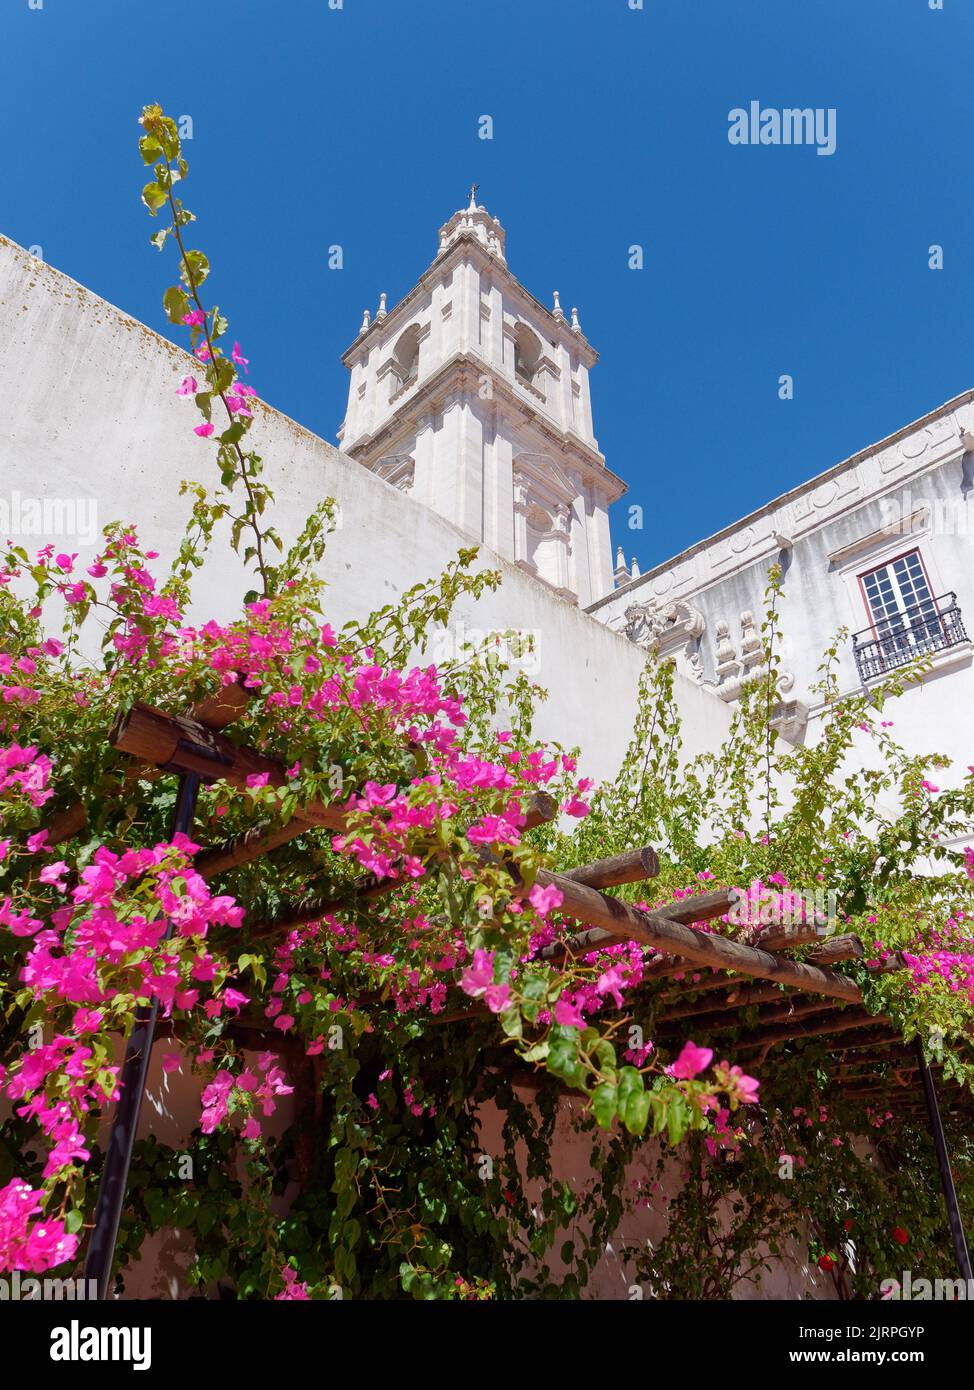 Flowers outside the Monastery of São Vicente de Fora (Monastery of Saint Vincent Outside the Walls) in Lisbon, Portugal. Stock Photo